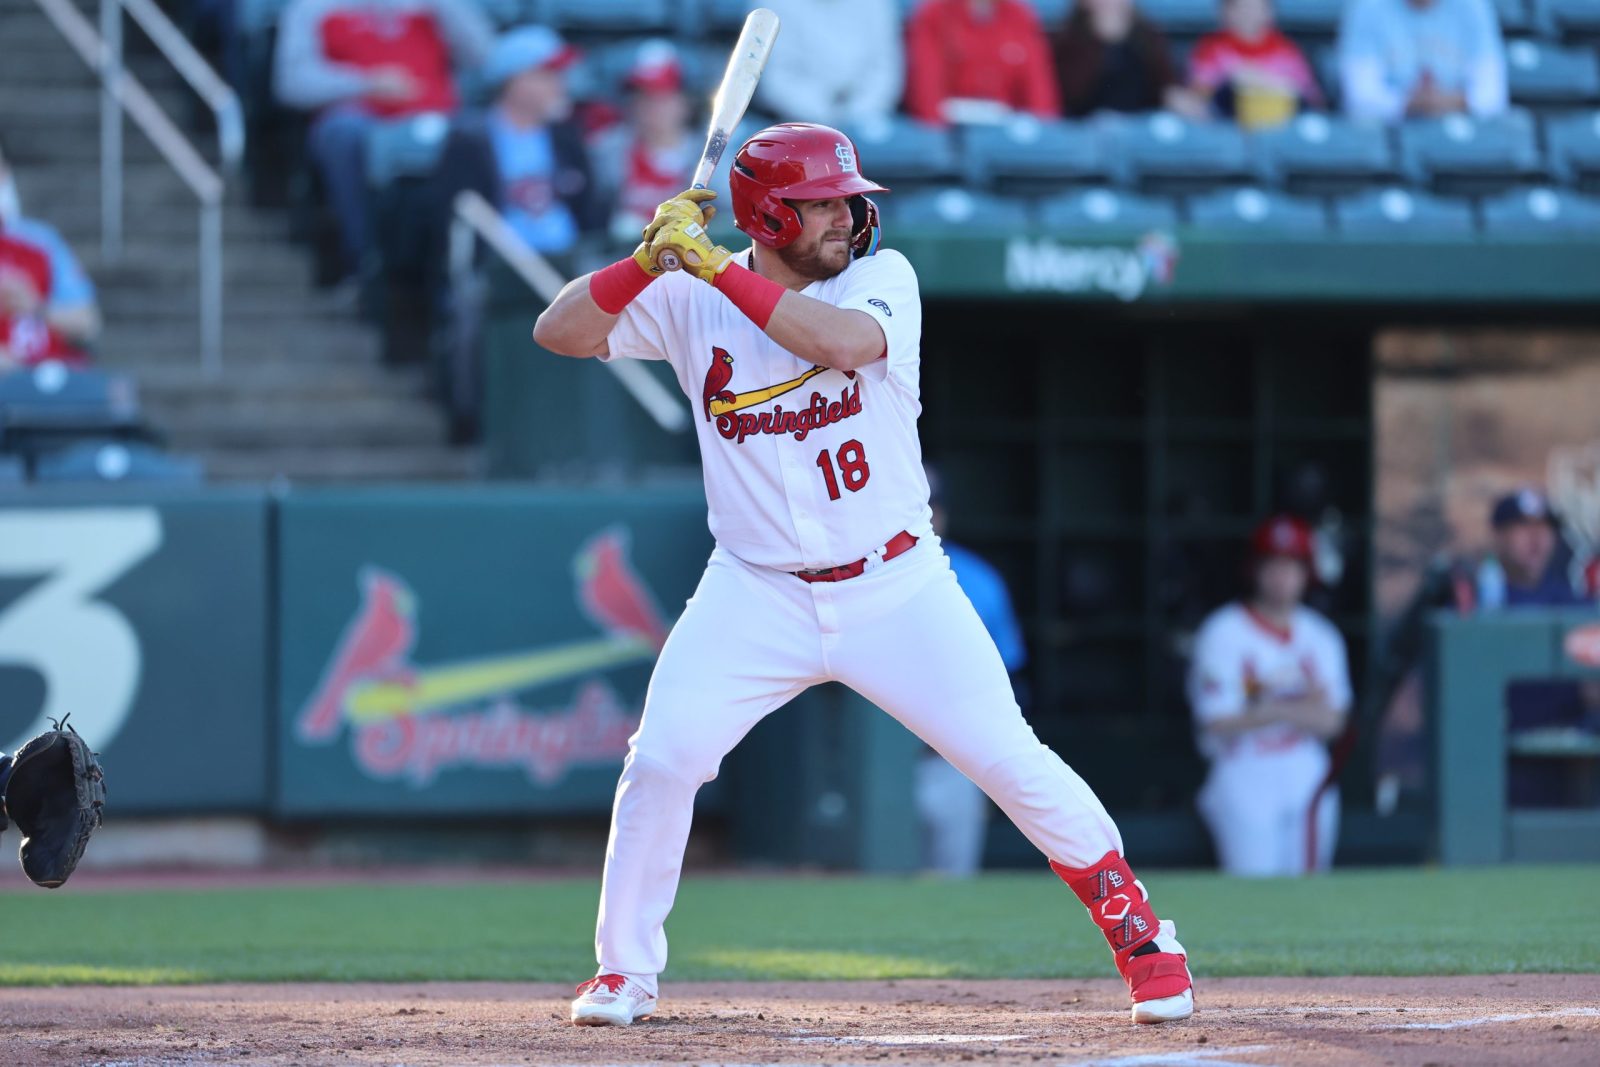 A baseball player in a Springfield Cardinals uniform gets ready to hit the ball